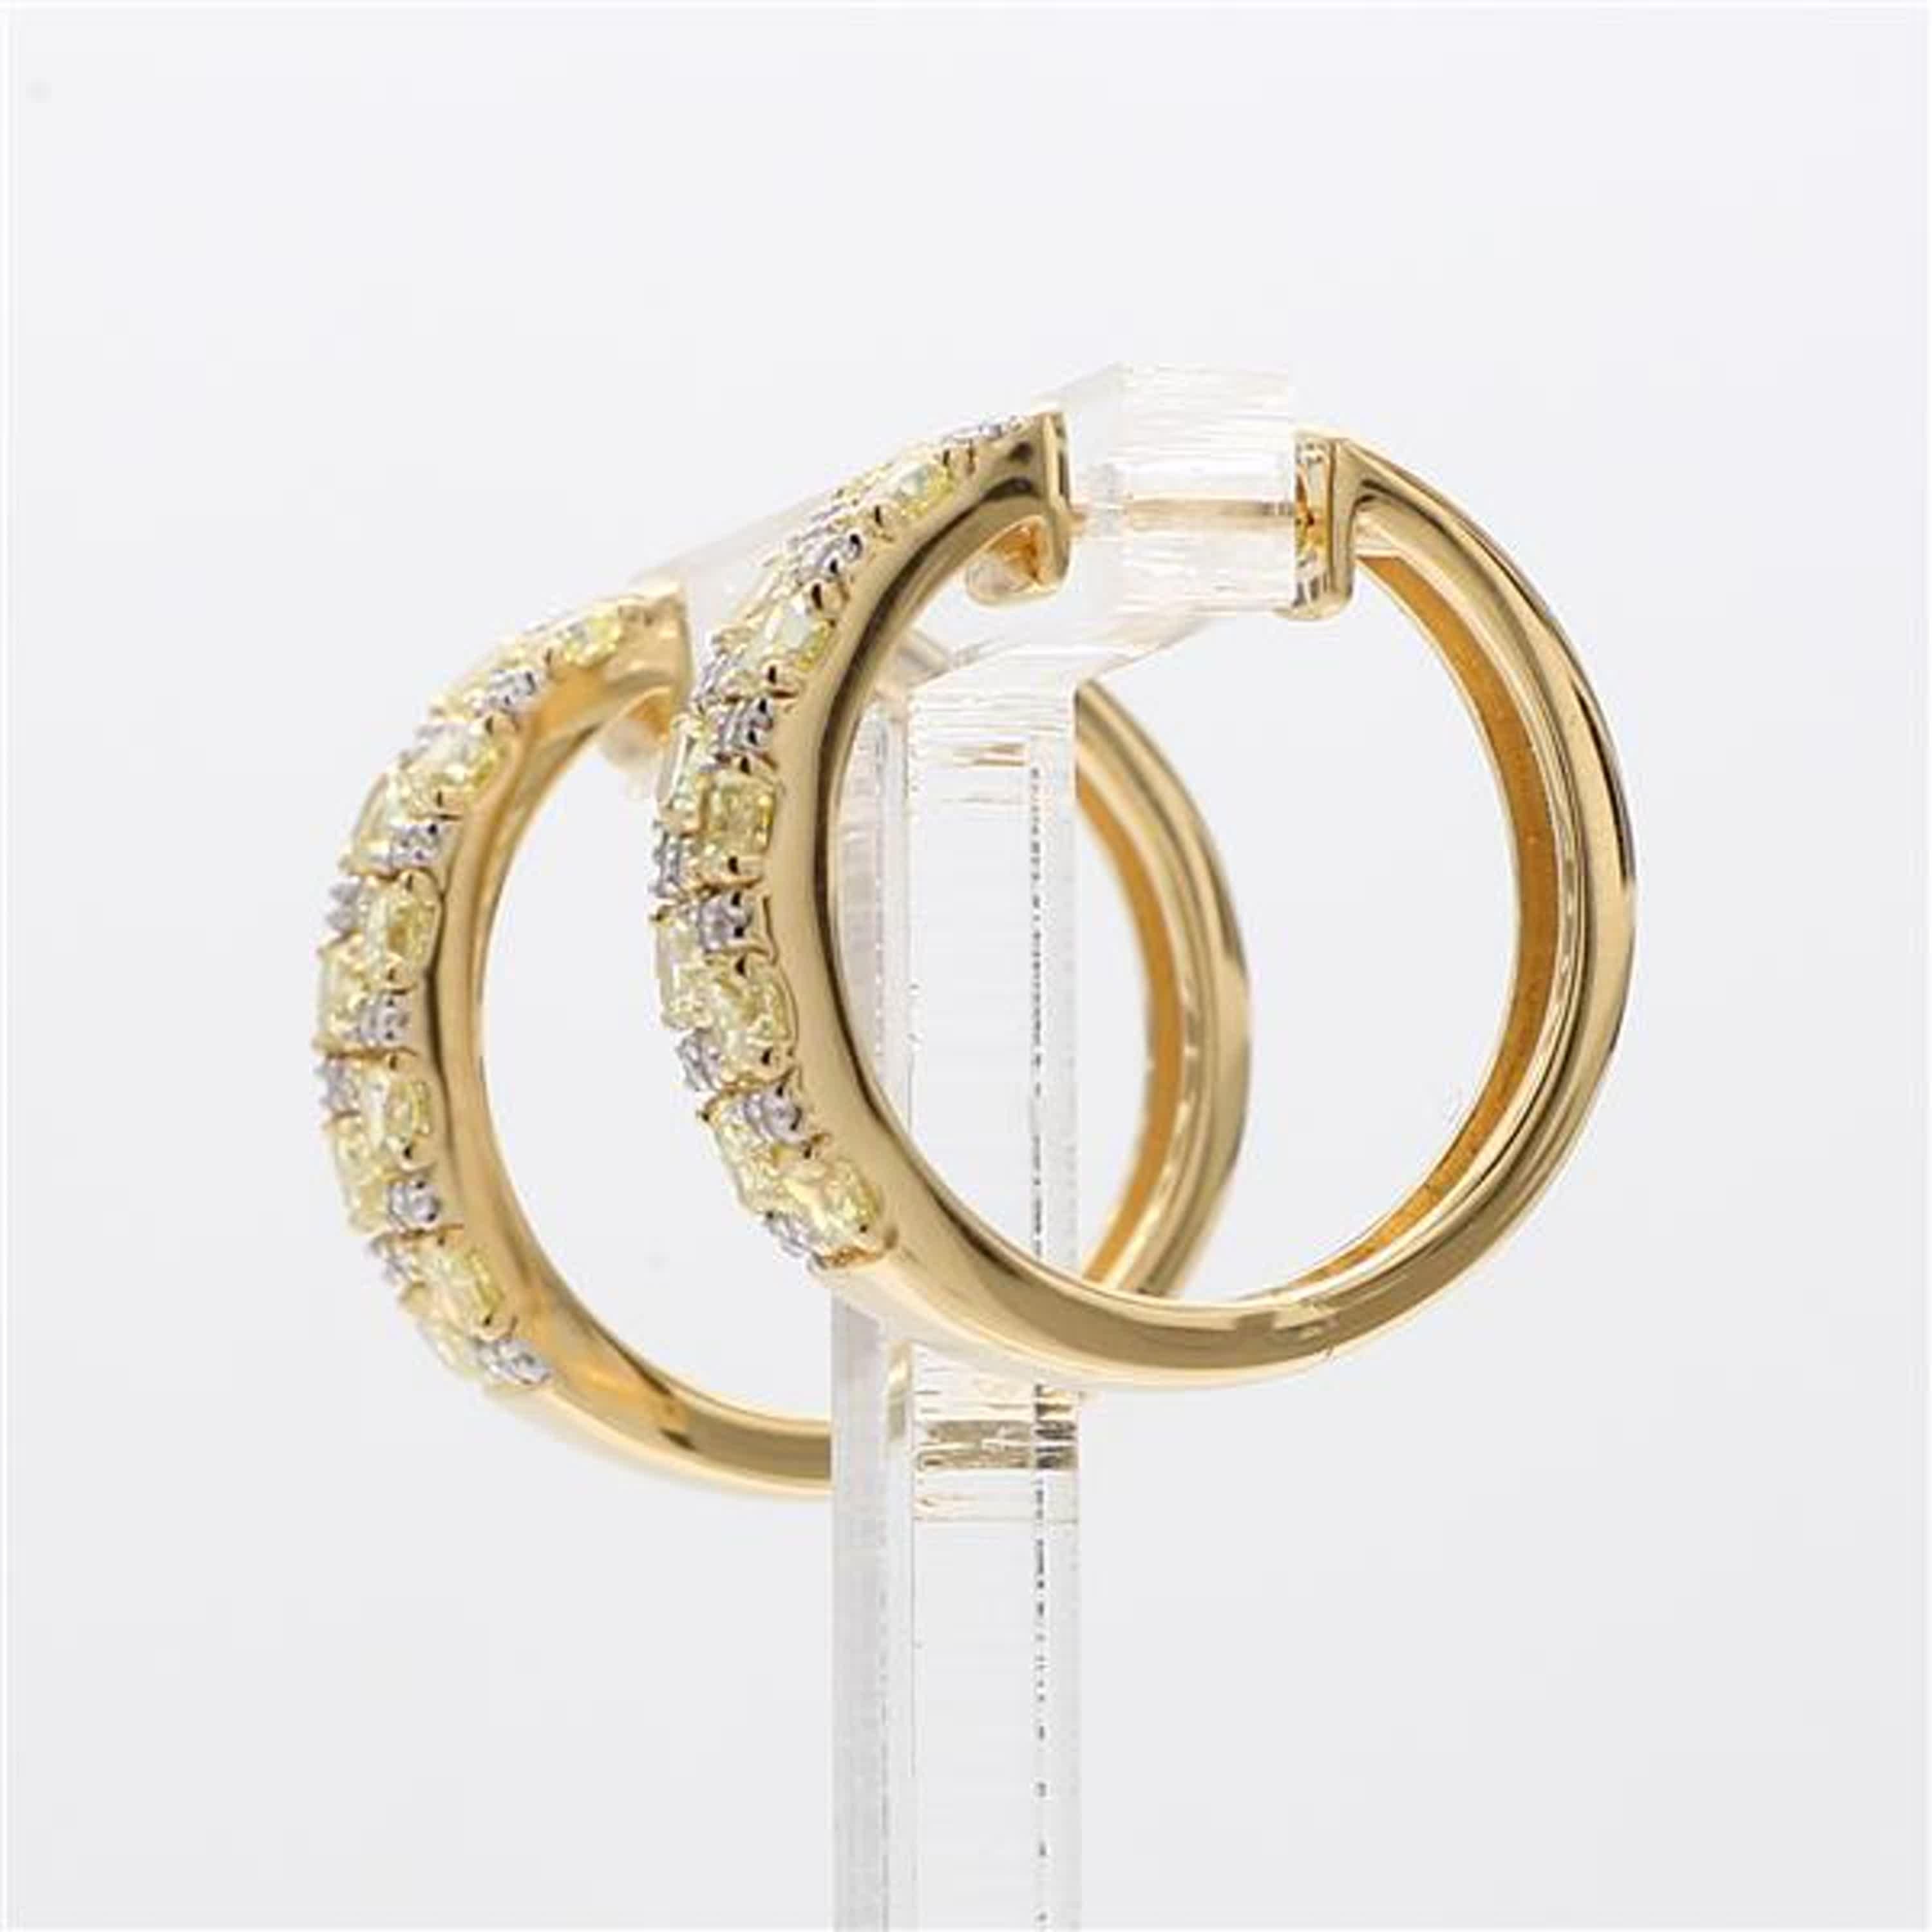 Contemporary Natural Yellow Radiant and White Diamond 1.66 Carat TW Yellow Gold Earrings